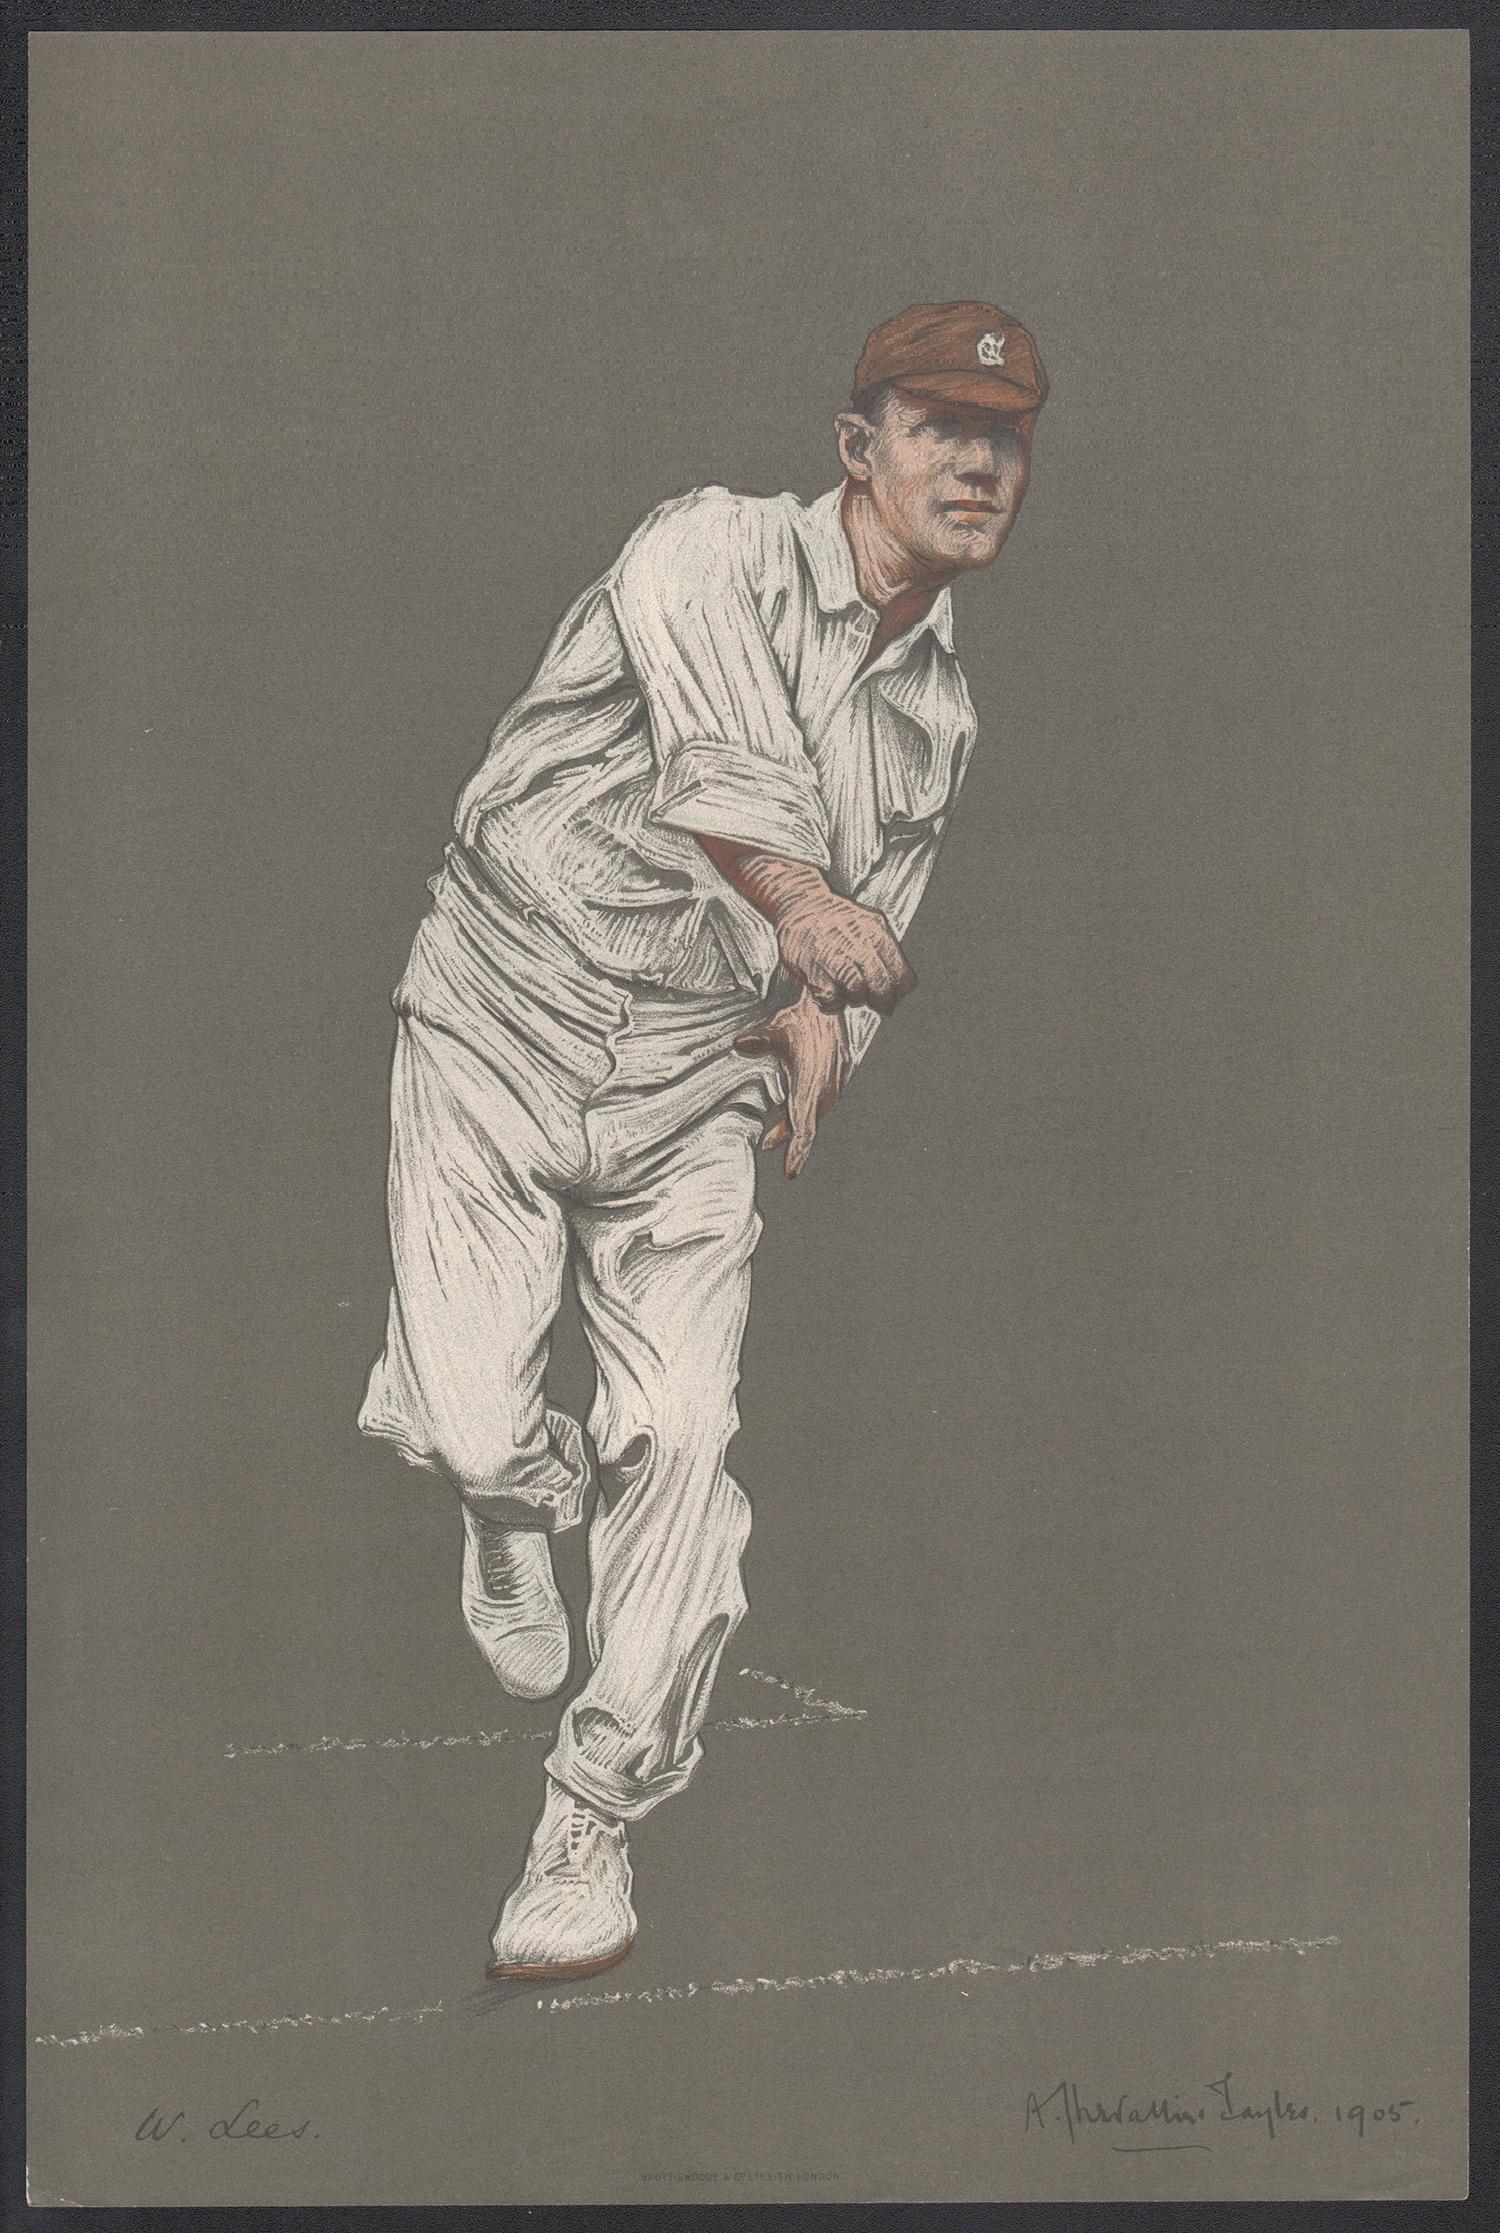 Walter Lees, Empire Cricketeer, English cricket portrait lithograph, 1905 - Print by Albert Chevallier Tayler